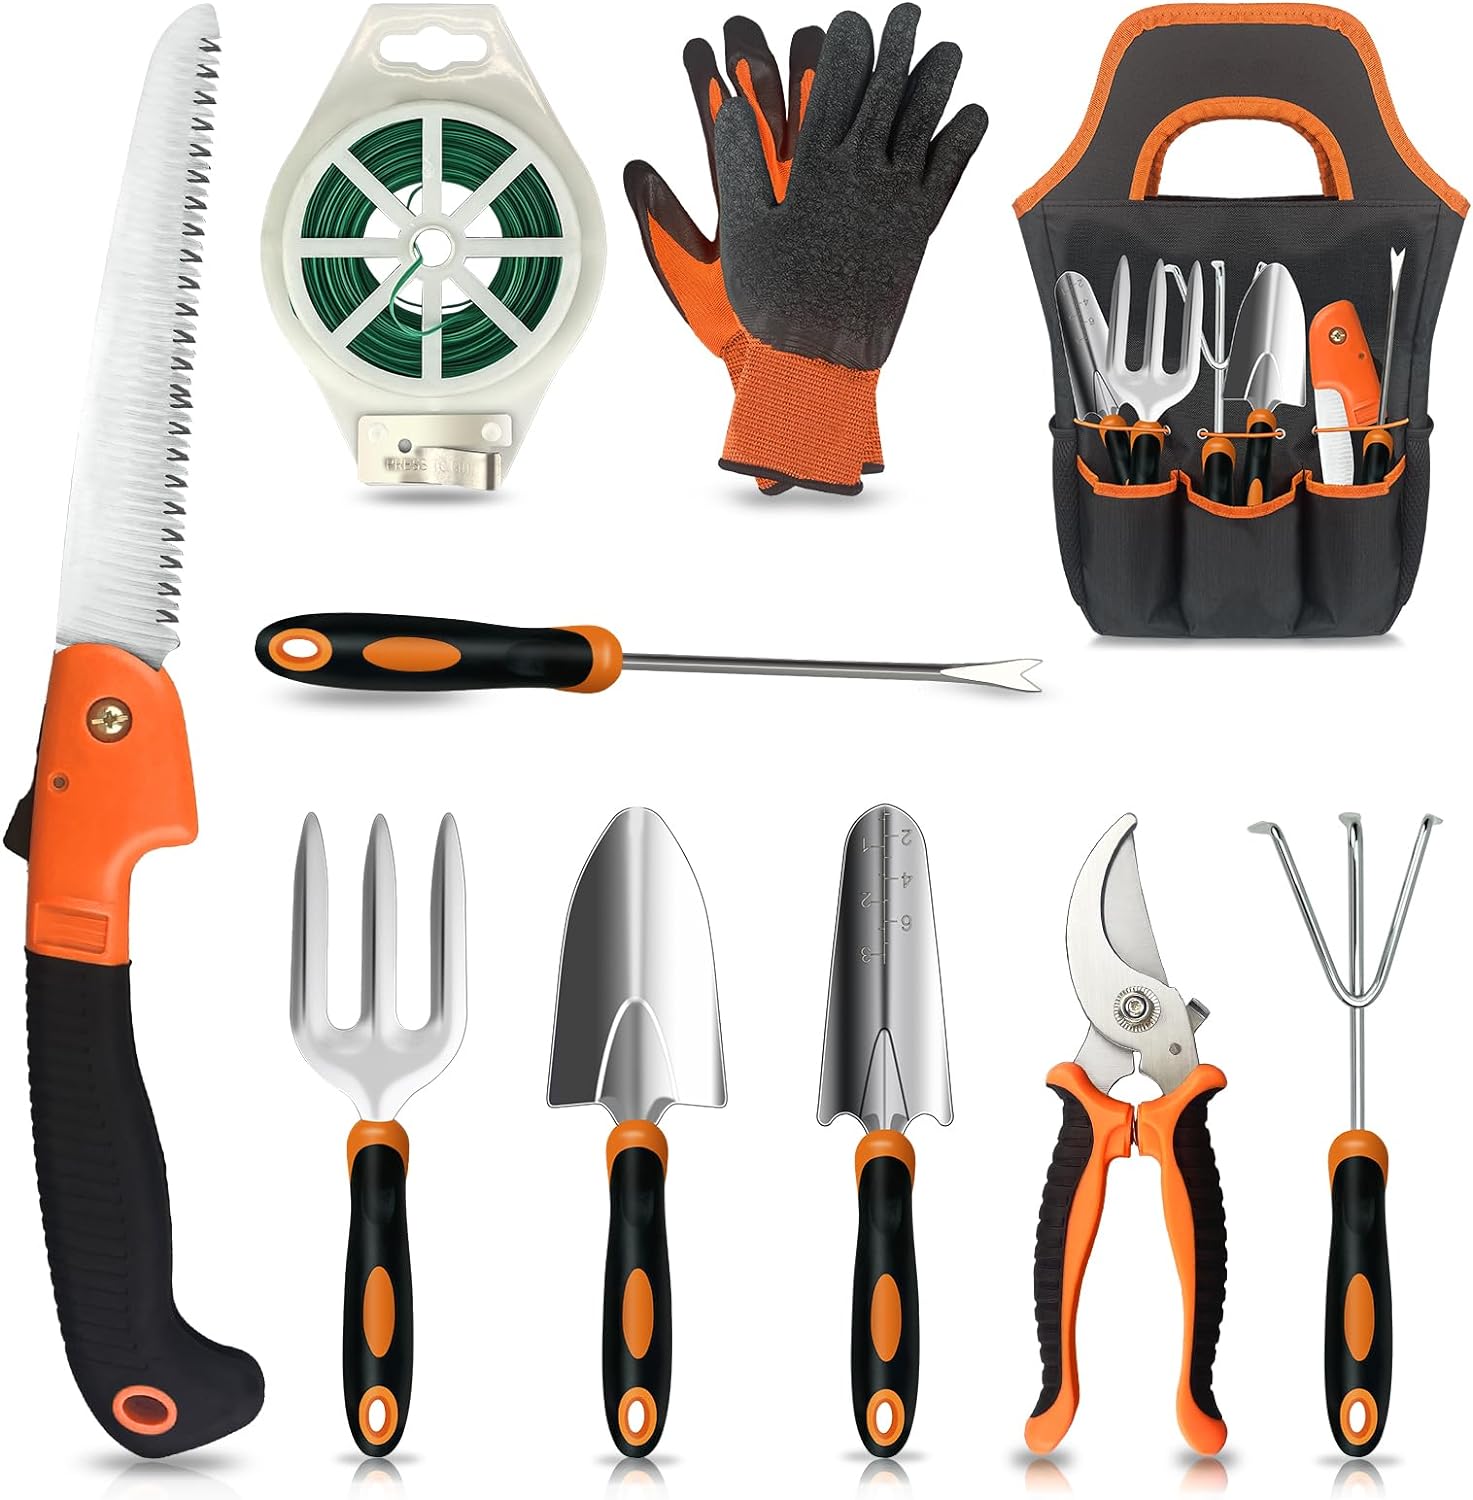 a picture showing garden tools making a buzz on the market before Black Friday and Cyber Monday